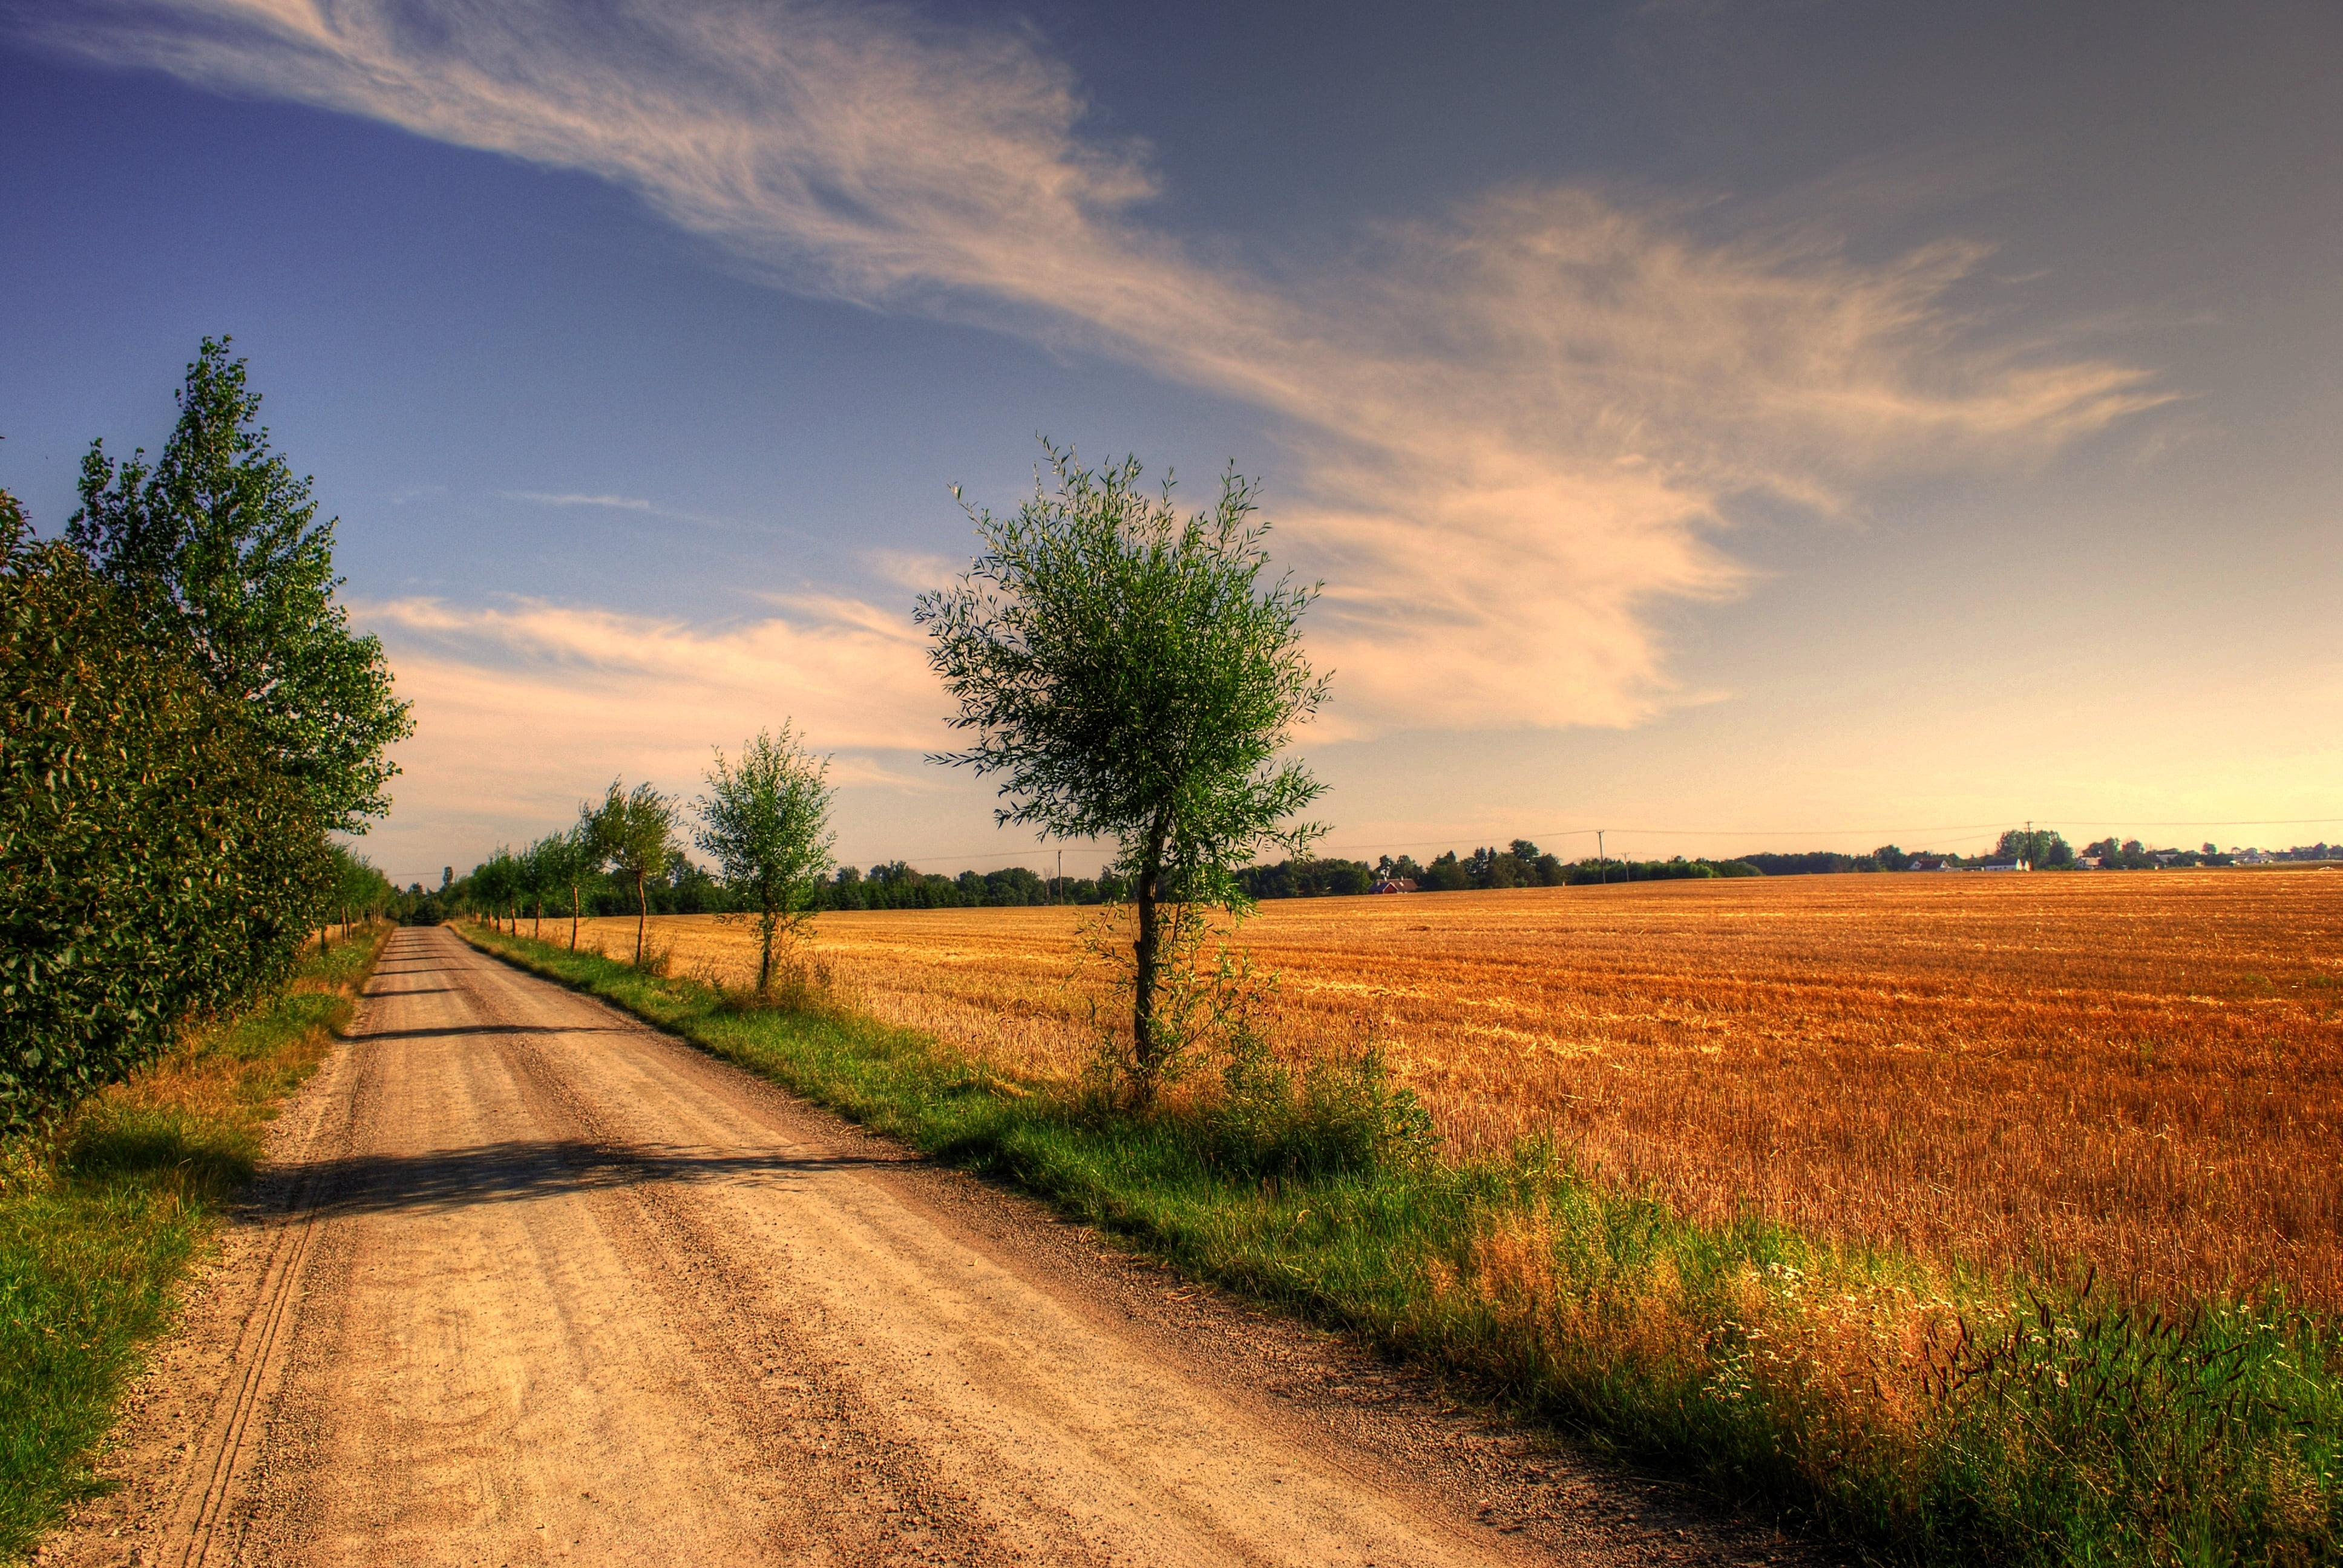 green trees, field, road, landscape, nature, rural Scene, outdoors